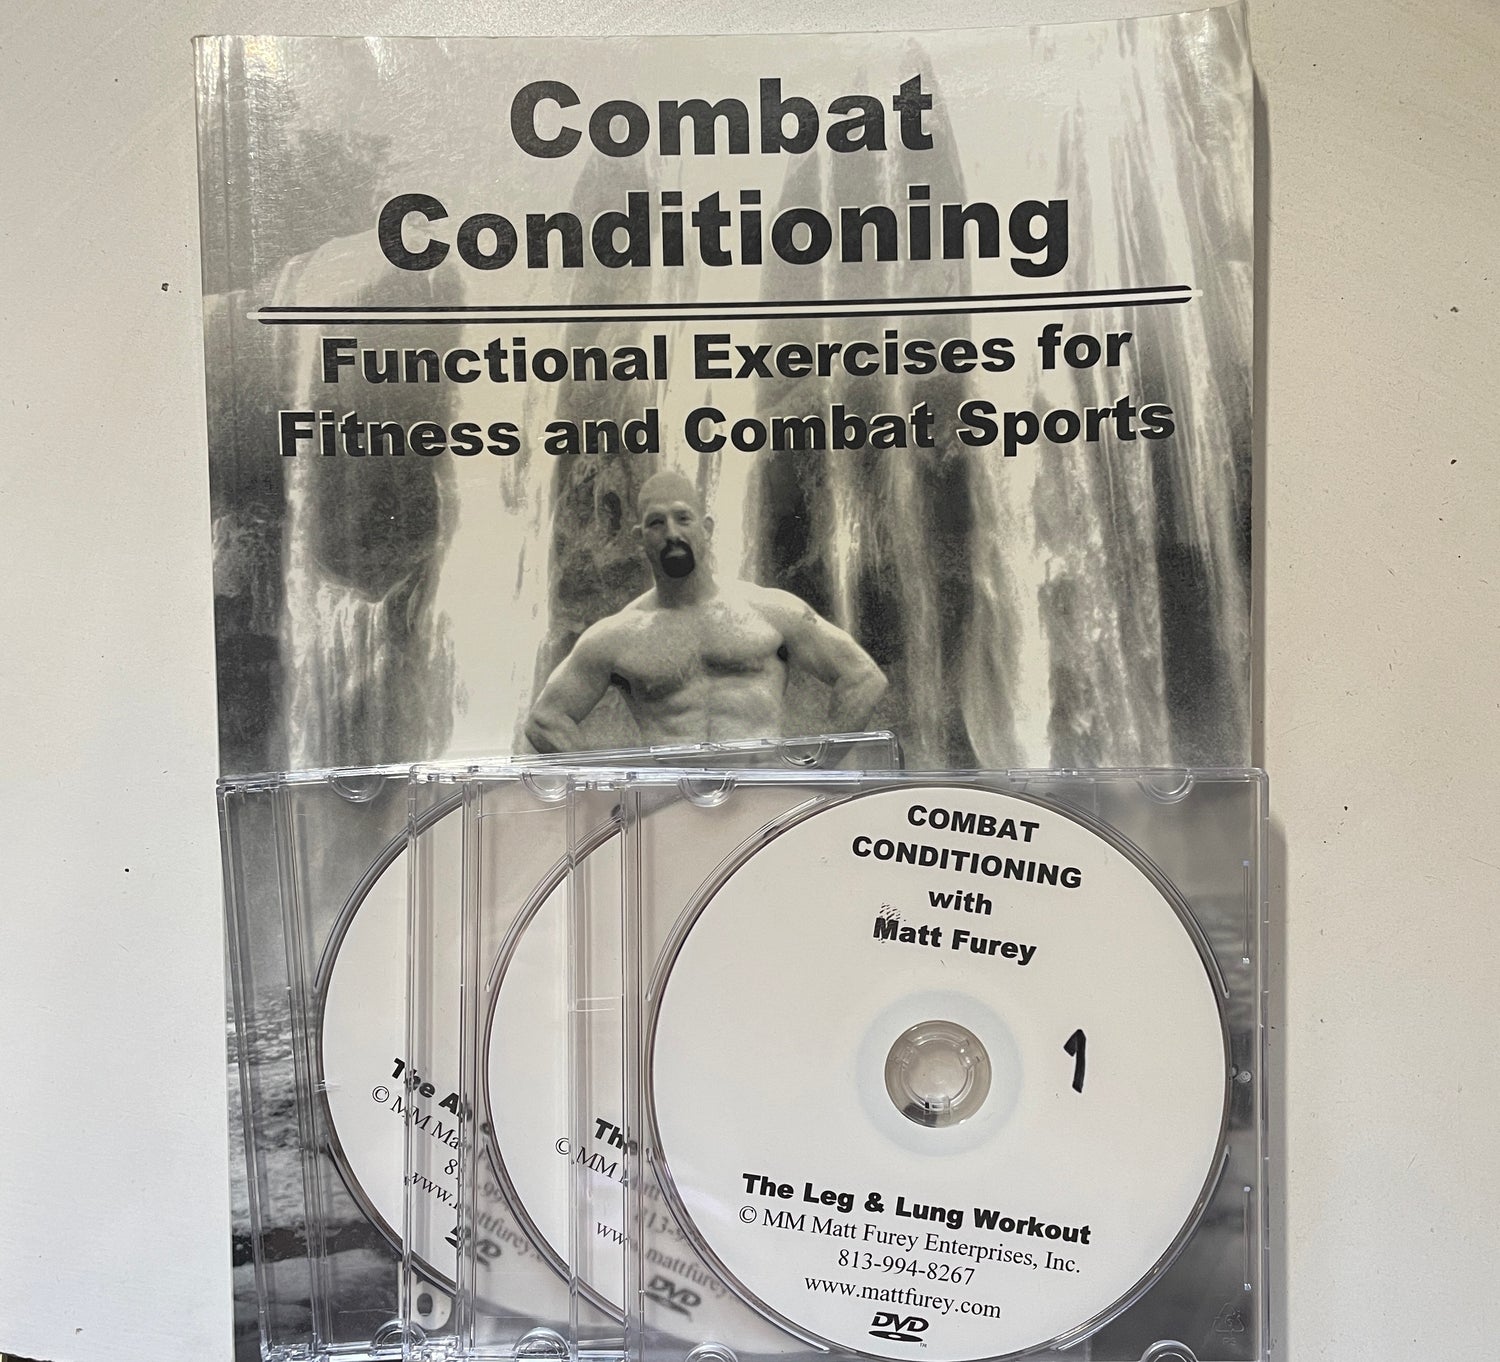 Combat Conditioning: Functional Exercises For Fitness And Combat Sports Book & 3 DVD Set by Matt Furey (Revised Edition) (Preowned)